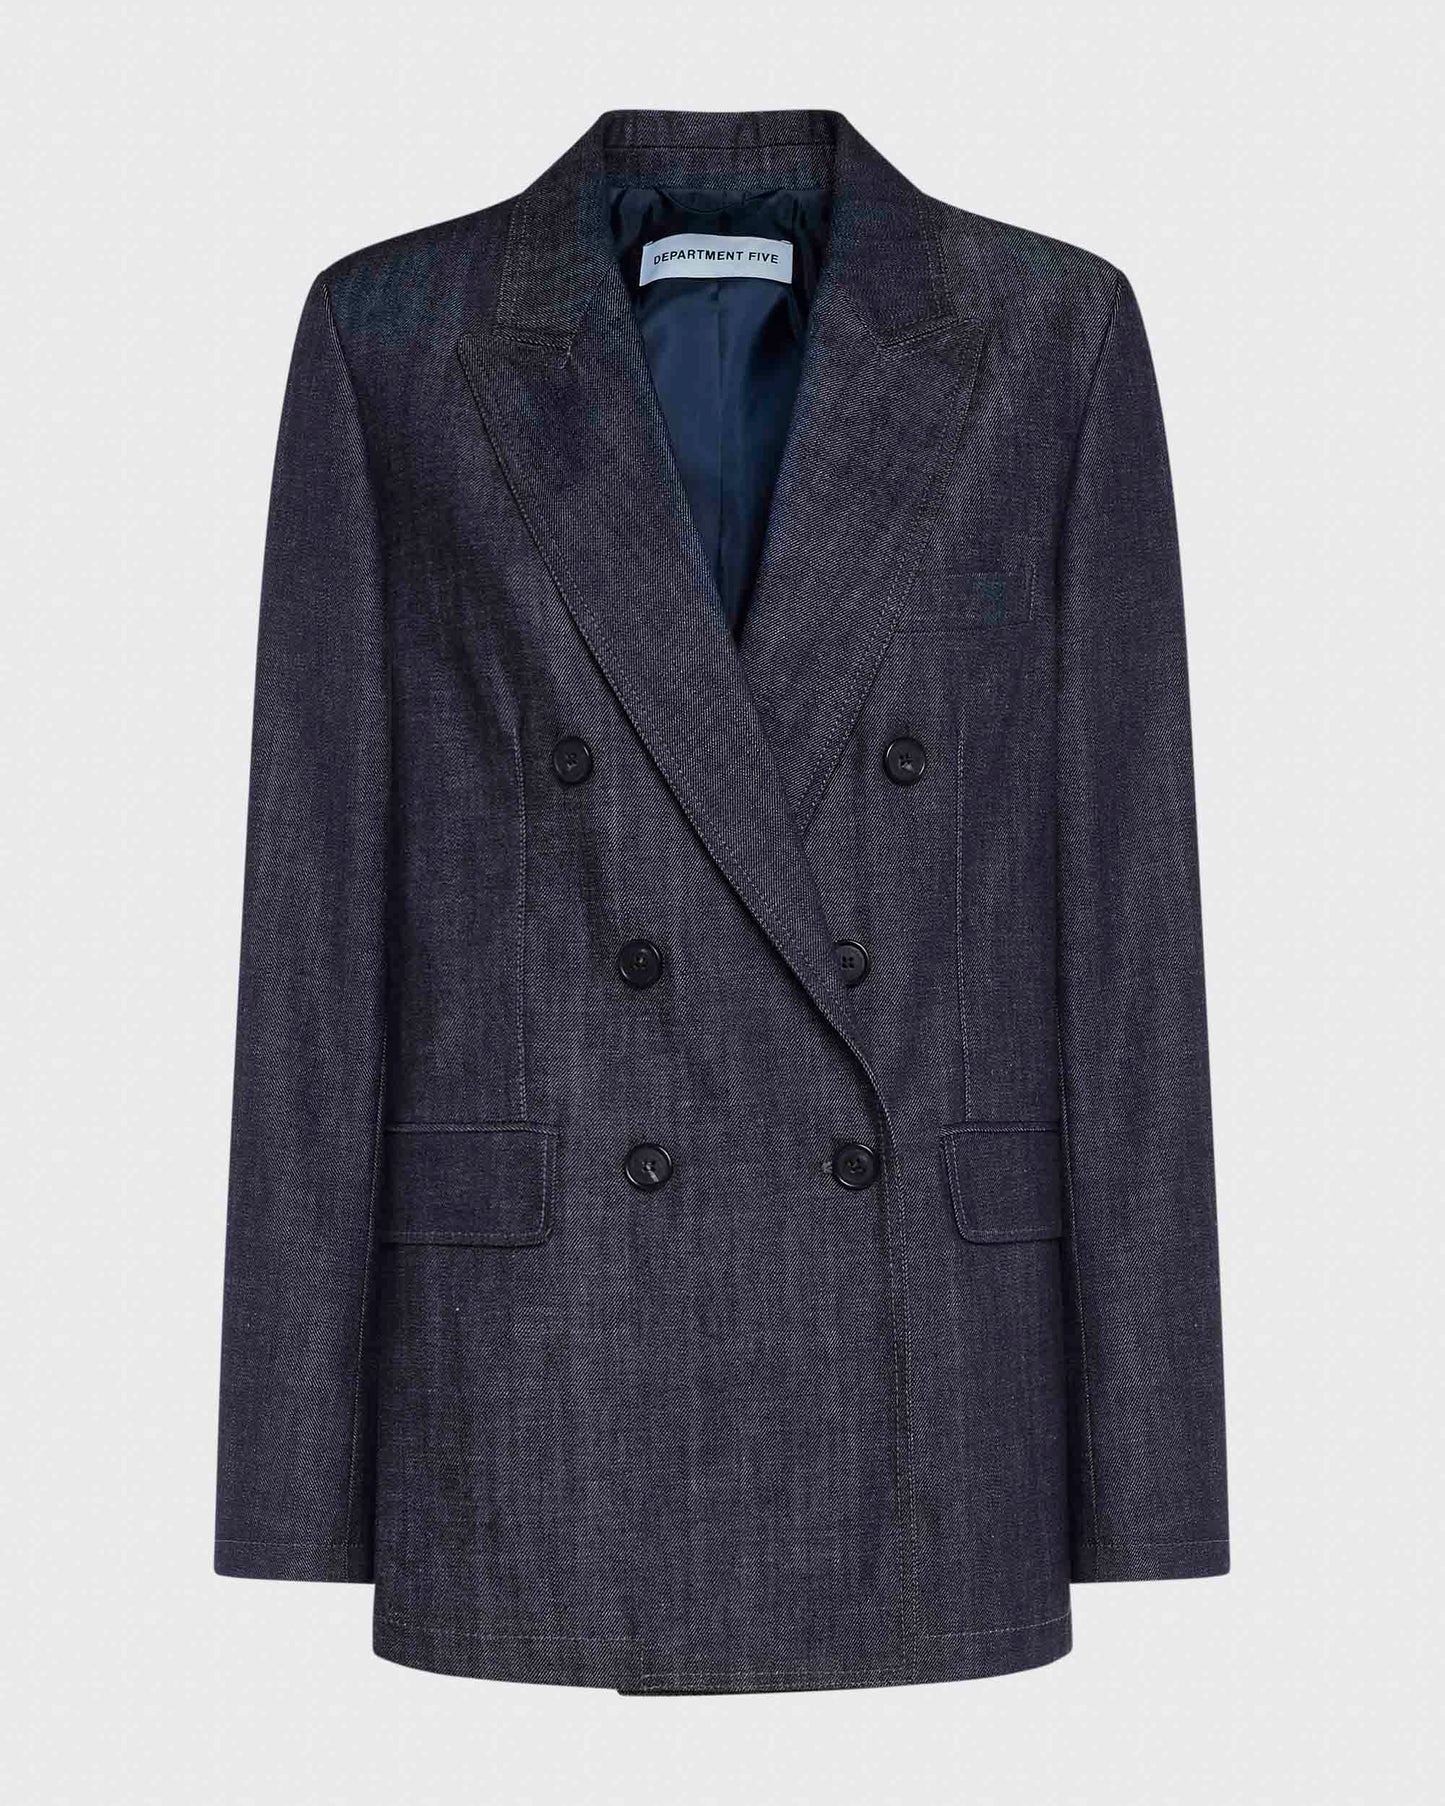 Chelsea double-breasted blazer